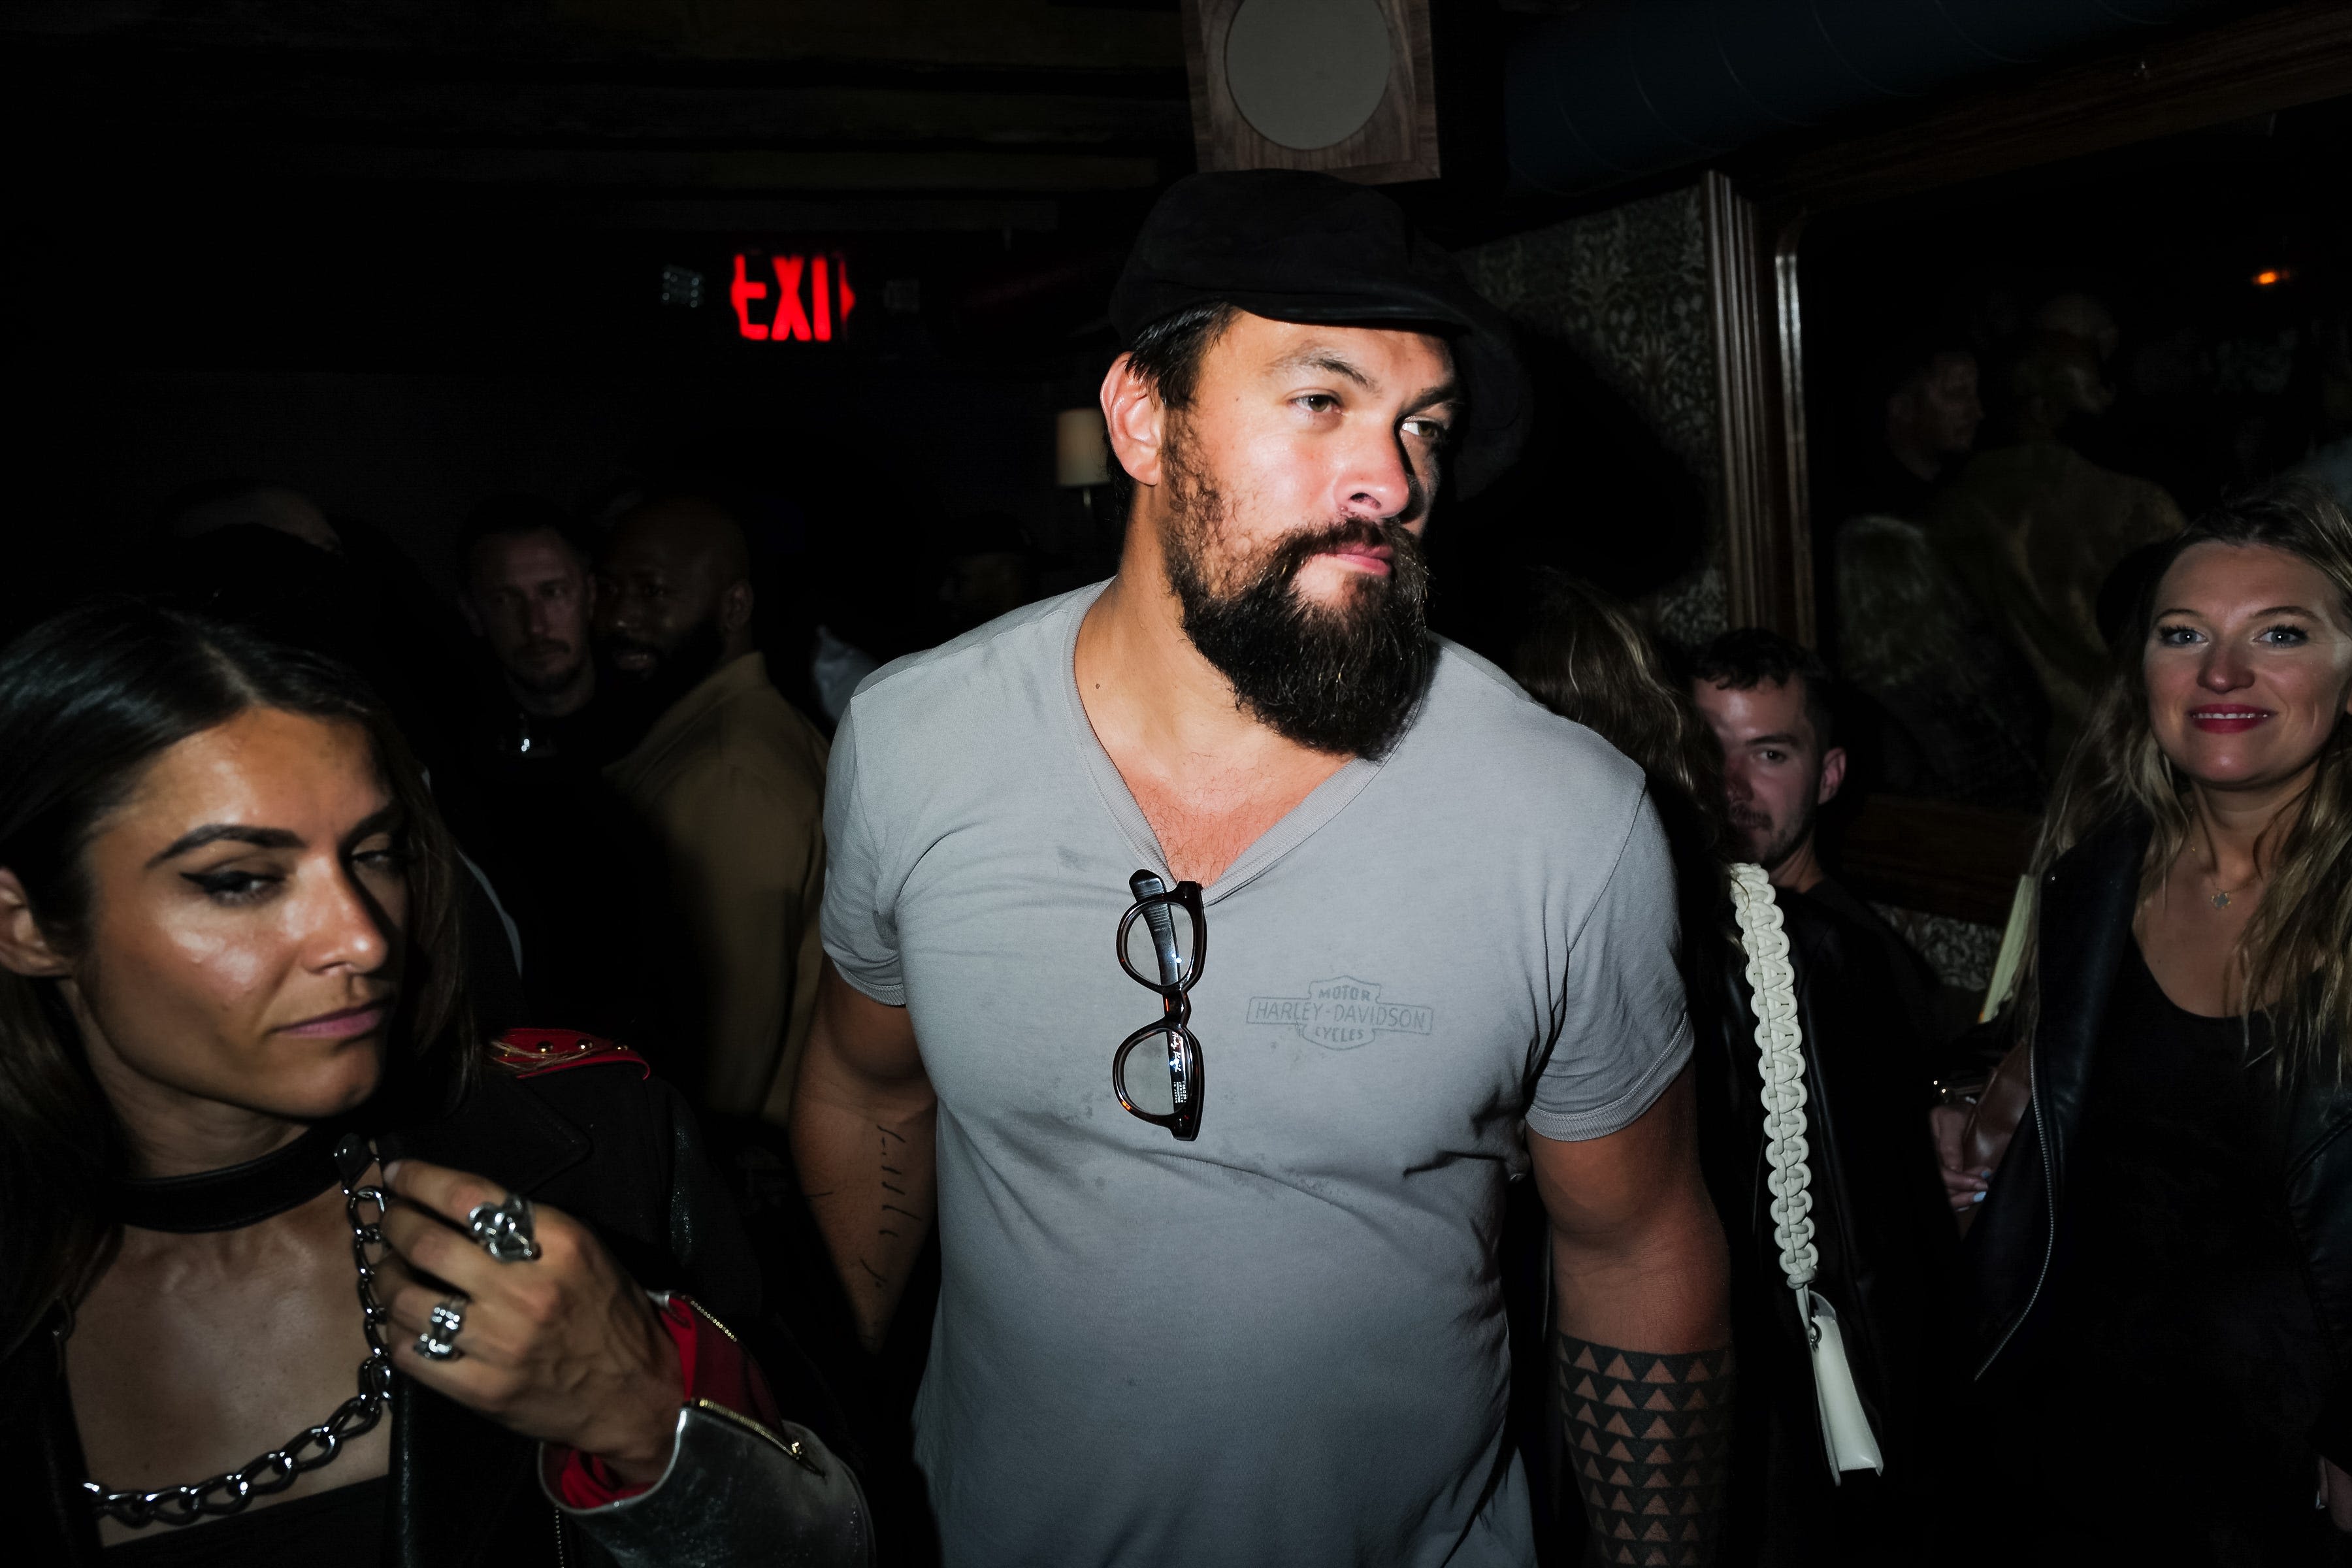 DC star Jason Momoa just formed a band and is headed to Nashville. Here's what to know